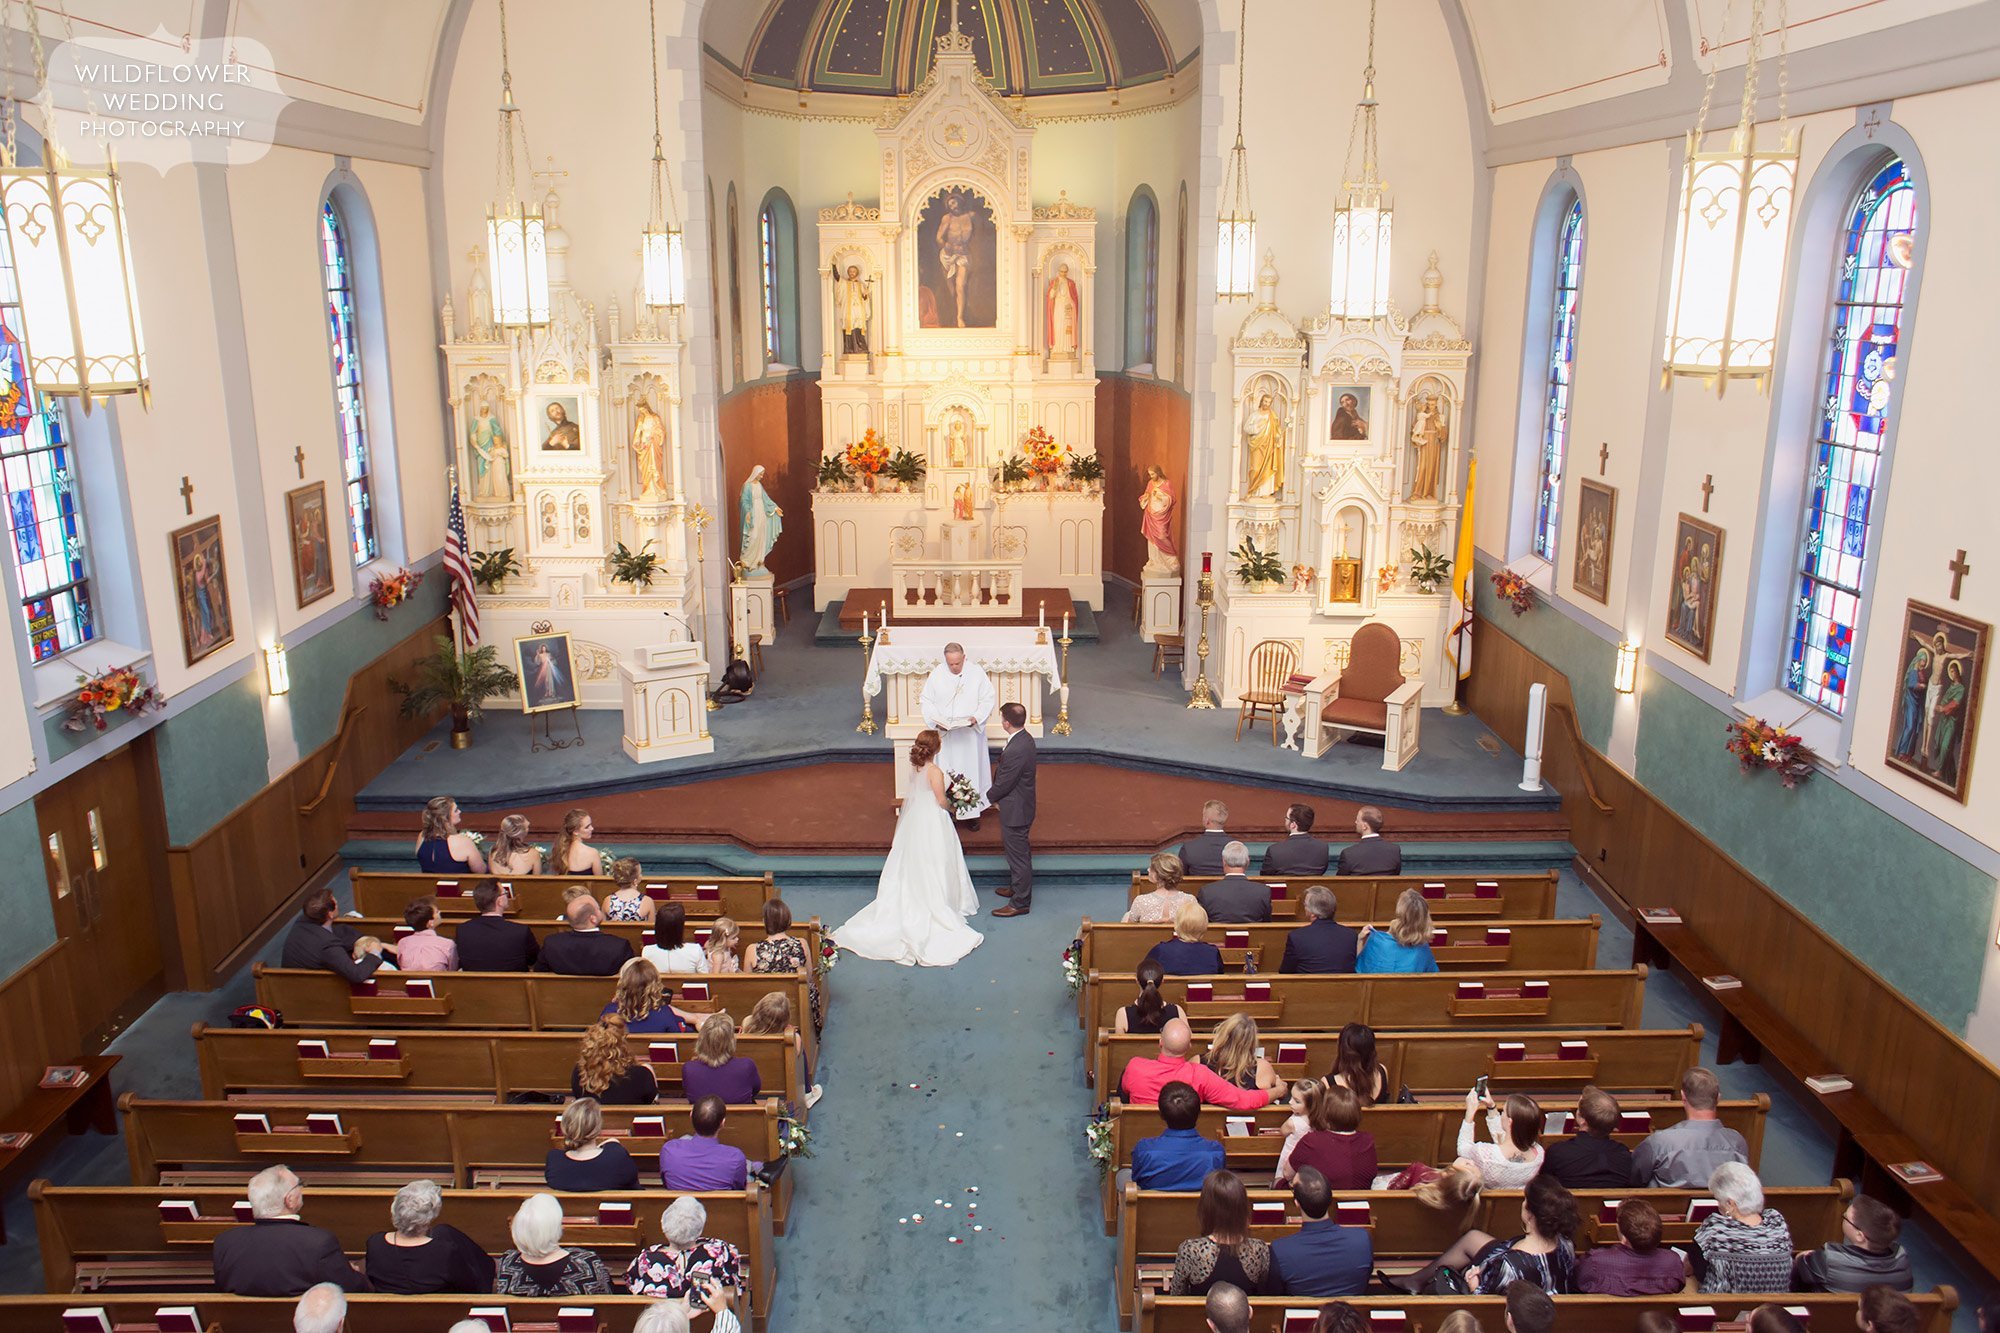 Inside view of a wedding ceremony at the St. Francis Xavier Church in Jeff City, MO.